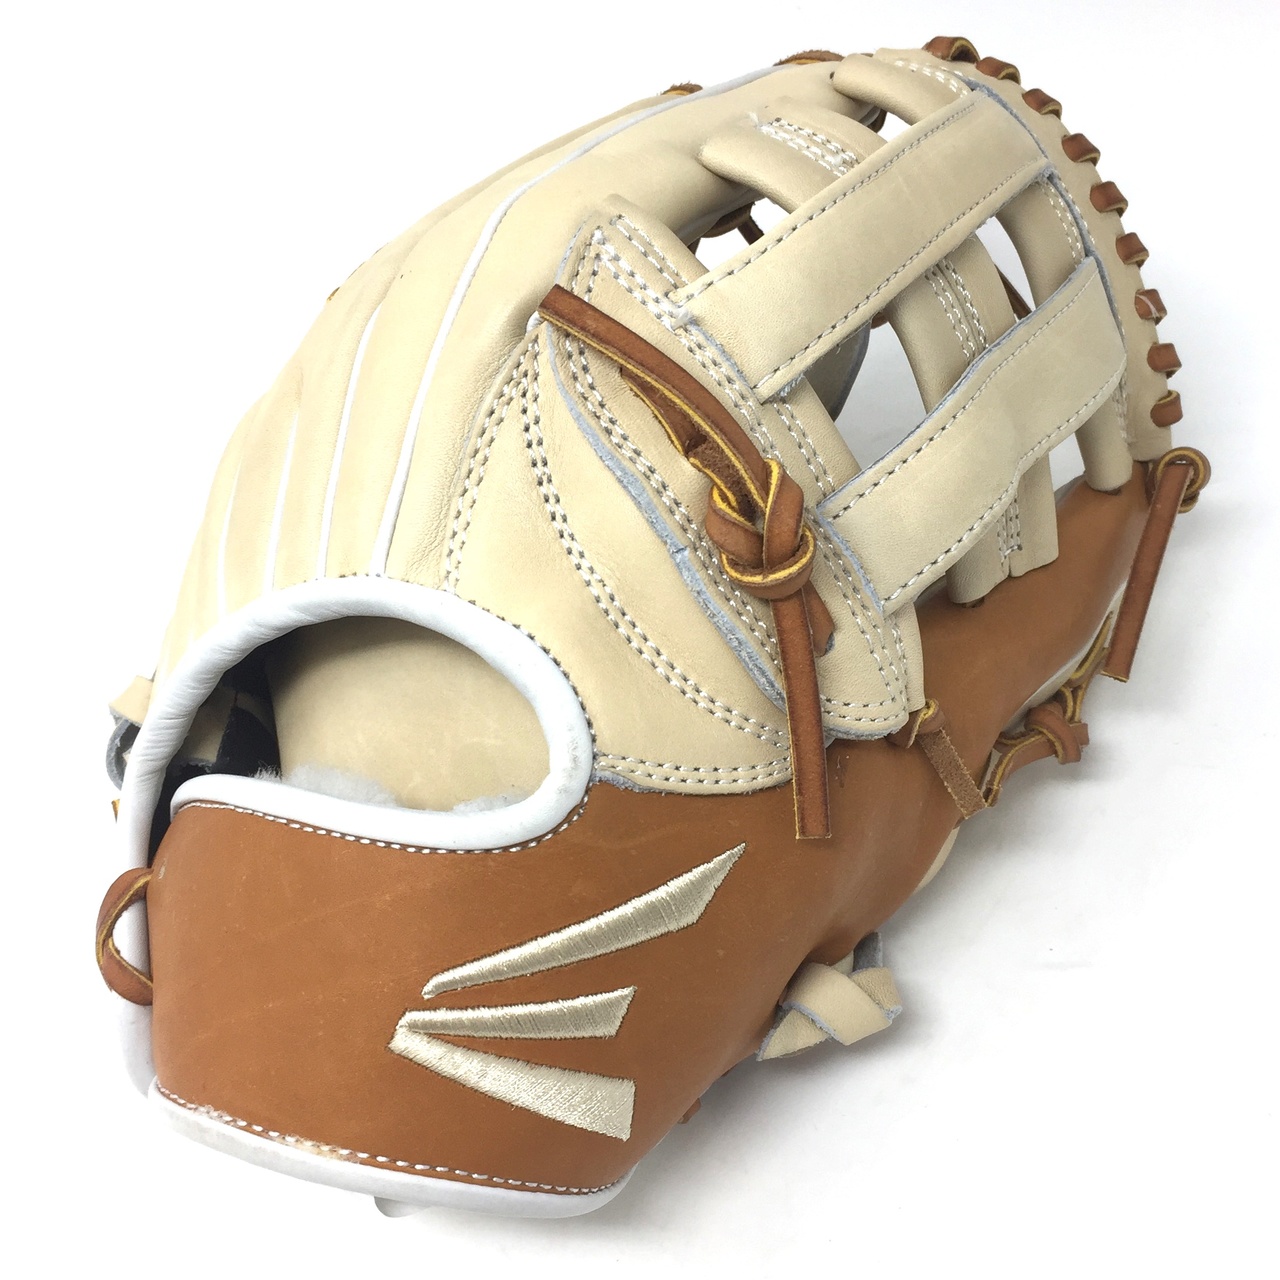 easton-small-batch-35-baseball-glove-11-75-right-hand-throw SMB35-C33-RightHandThrow Easton 628412242292 Eastons Small Batch project focuses on ball glove development using only